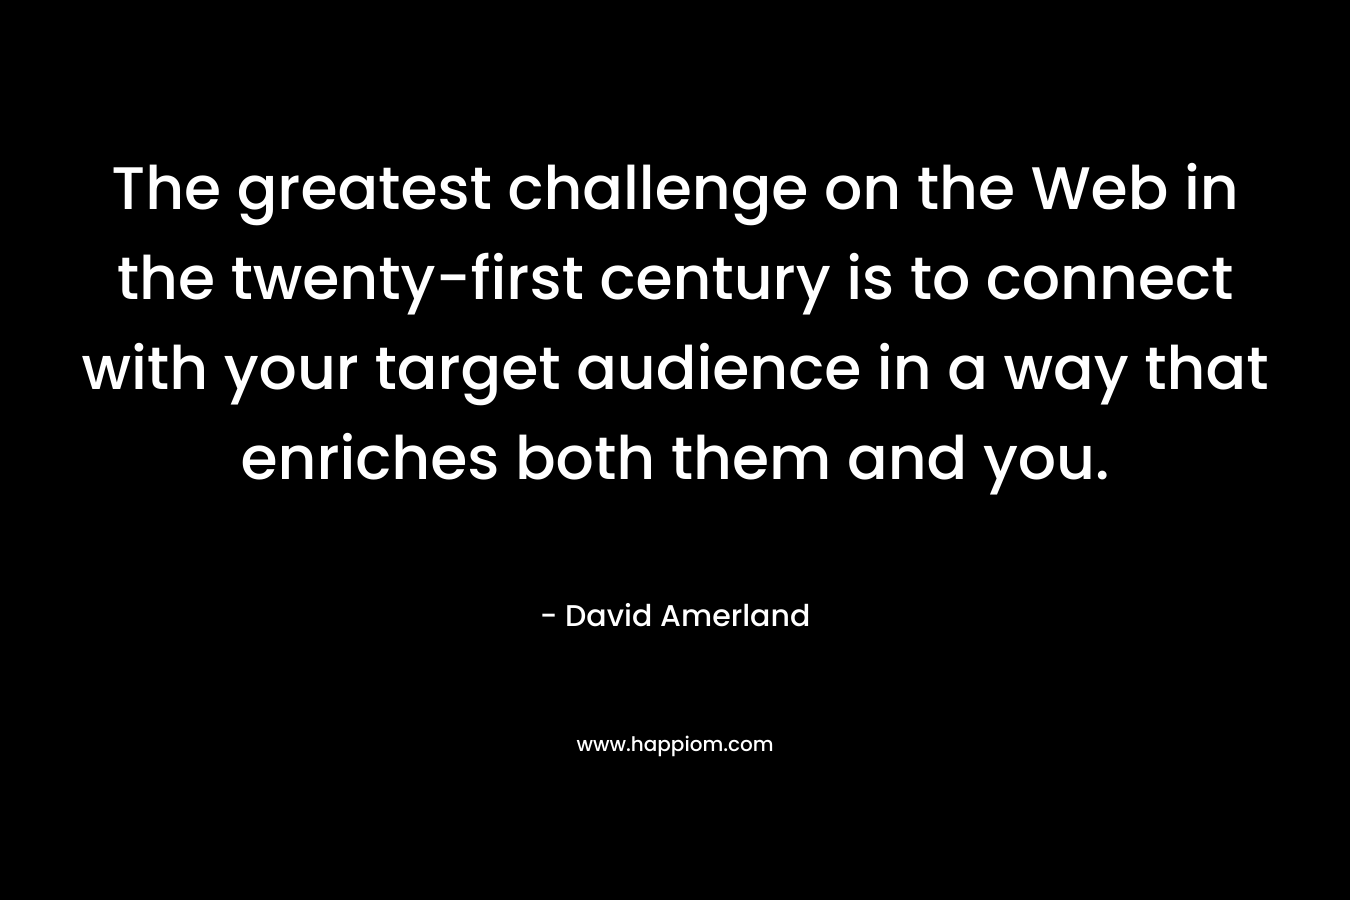 The greatest challenge on the Web in the twenty-first century is to connect with your target audience in a way that enriches both them and you.